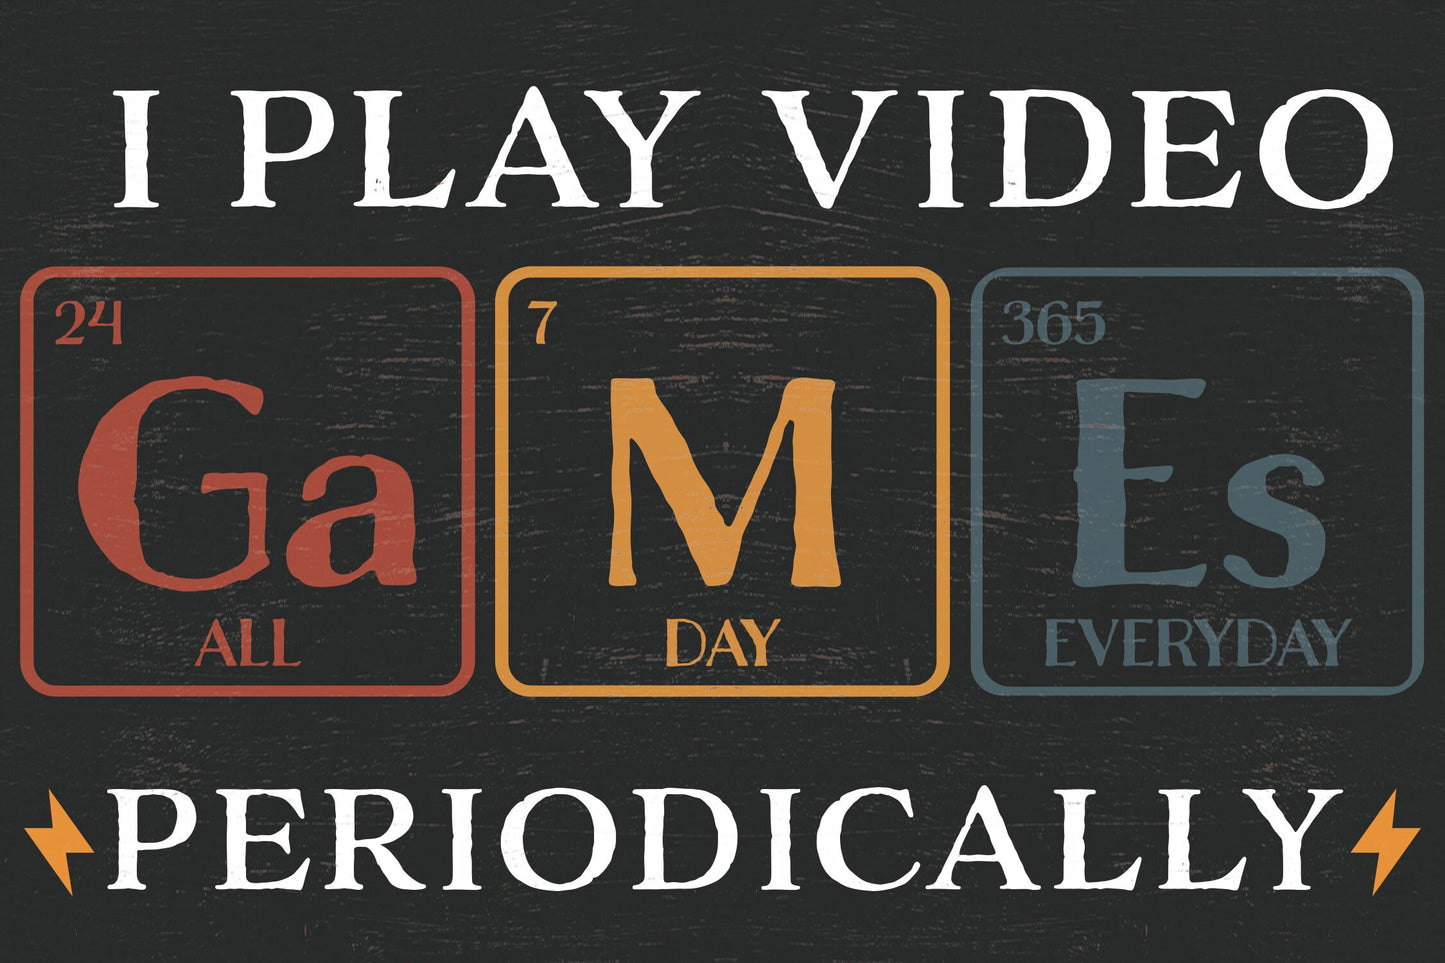 Show Your Gamer Side: 7.5in x 5in Wooden Wall Decor Sign - "I Play Video Games Periodically" with Element Blocks - Creative & Fun